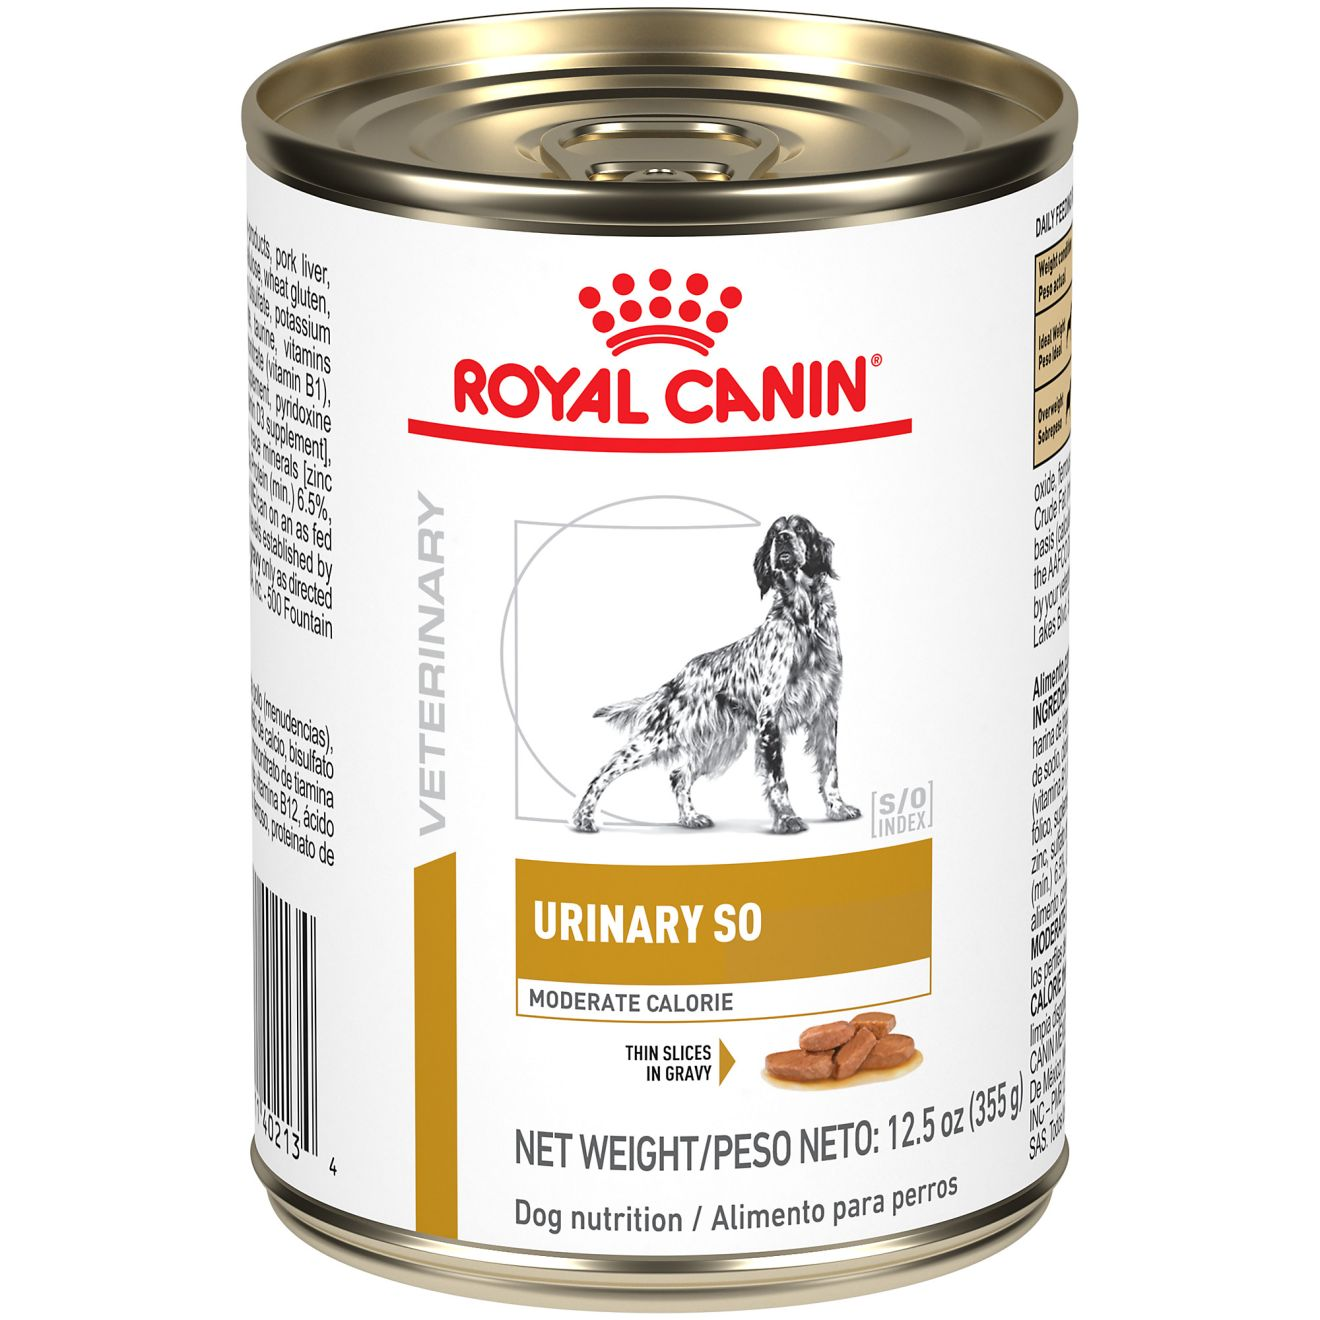 Canine Urinary SO® Moderate Calorie thin slices in gravy